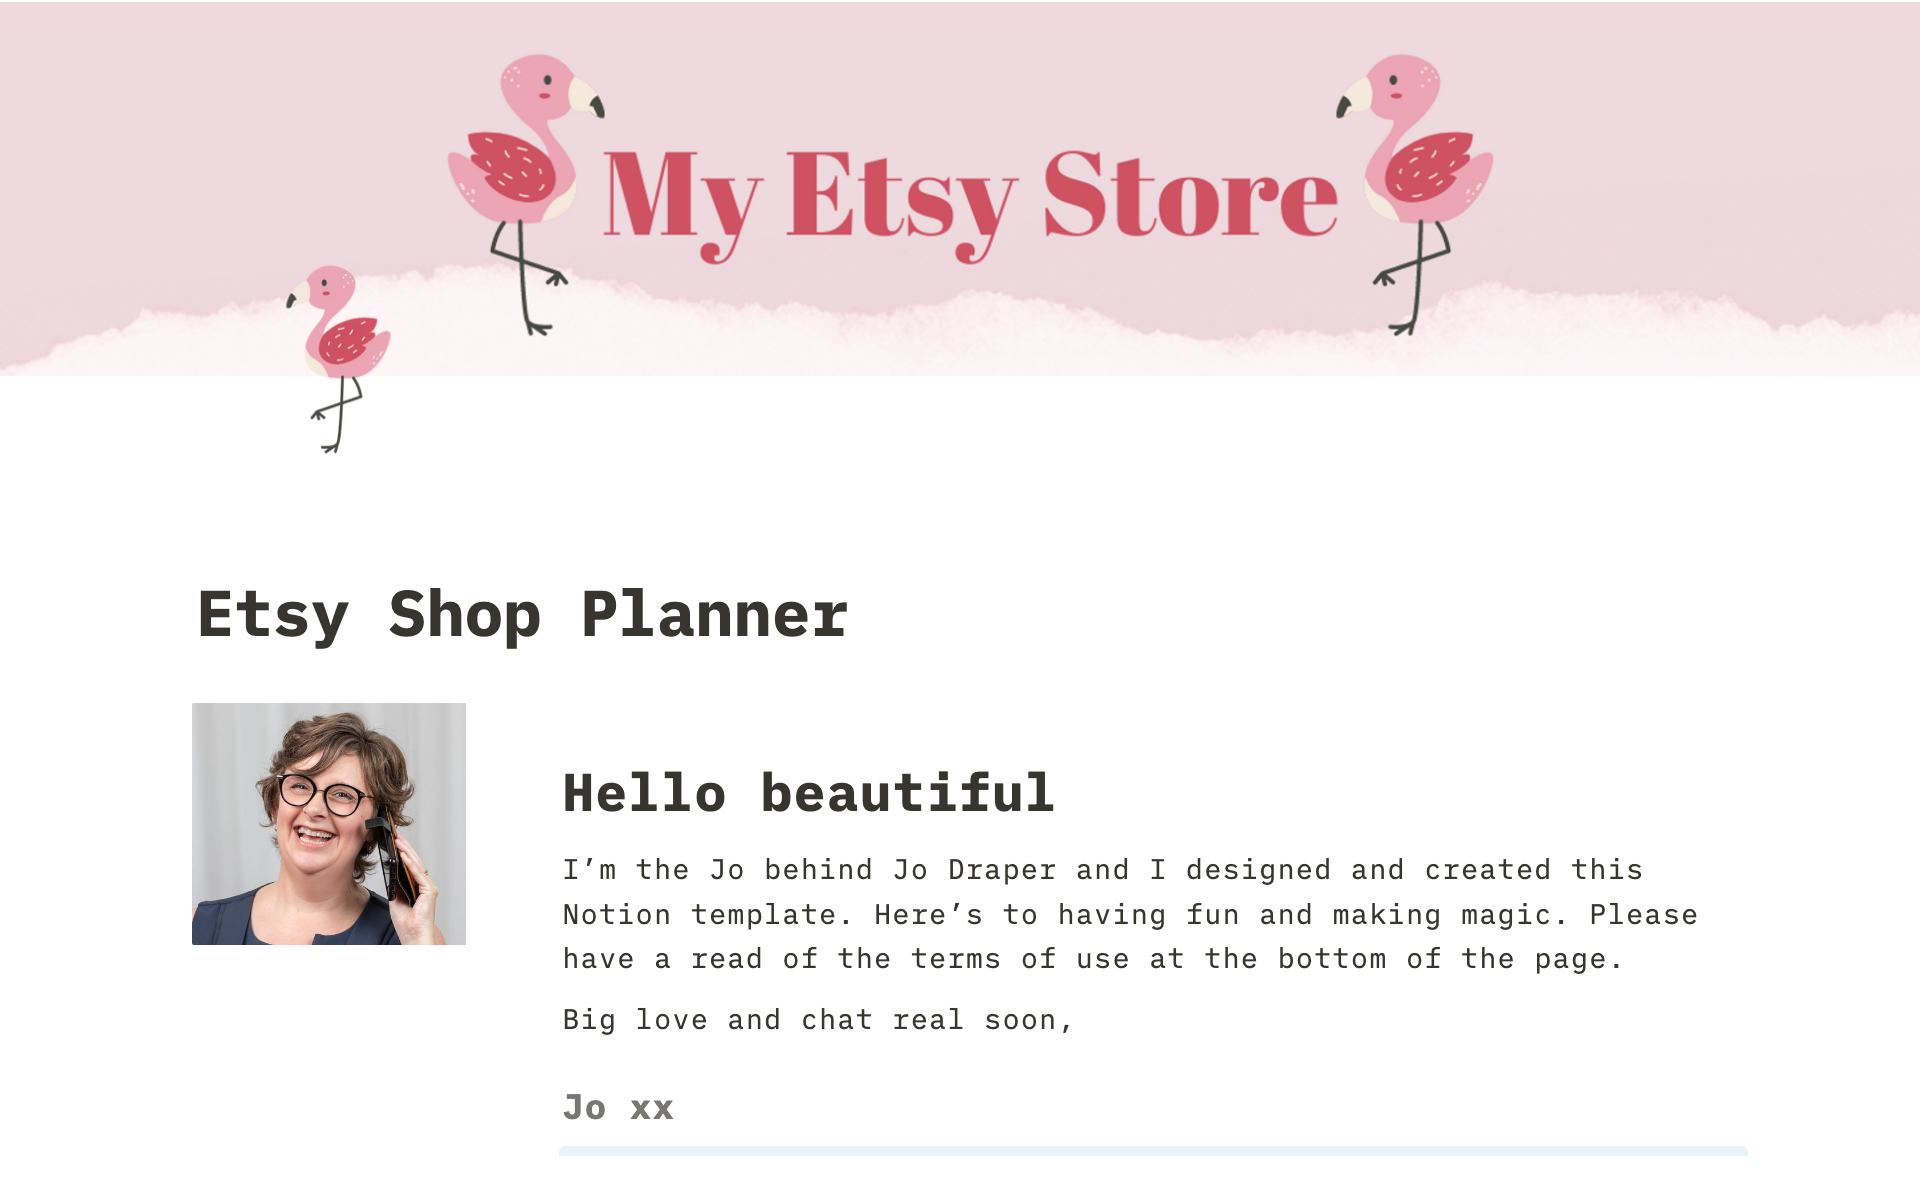 Helping Etsy sellers stay organised with listings and things to stay on top of.